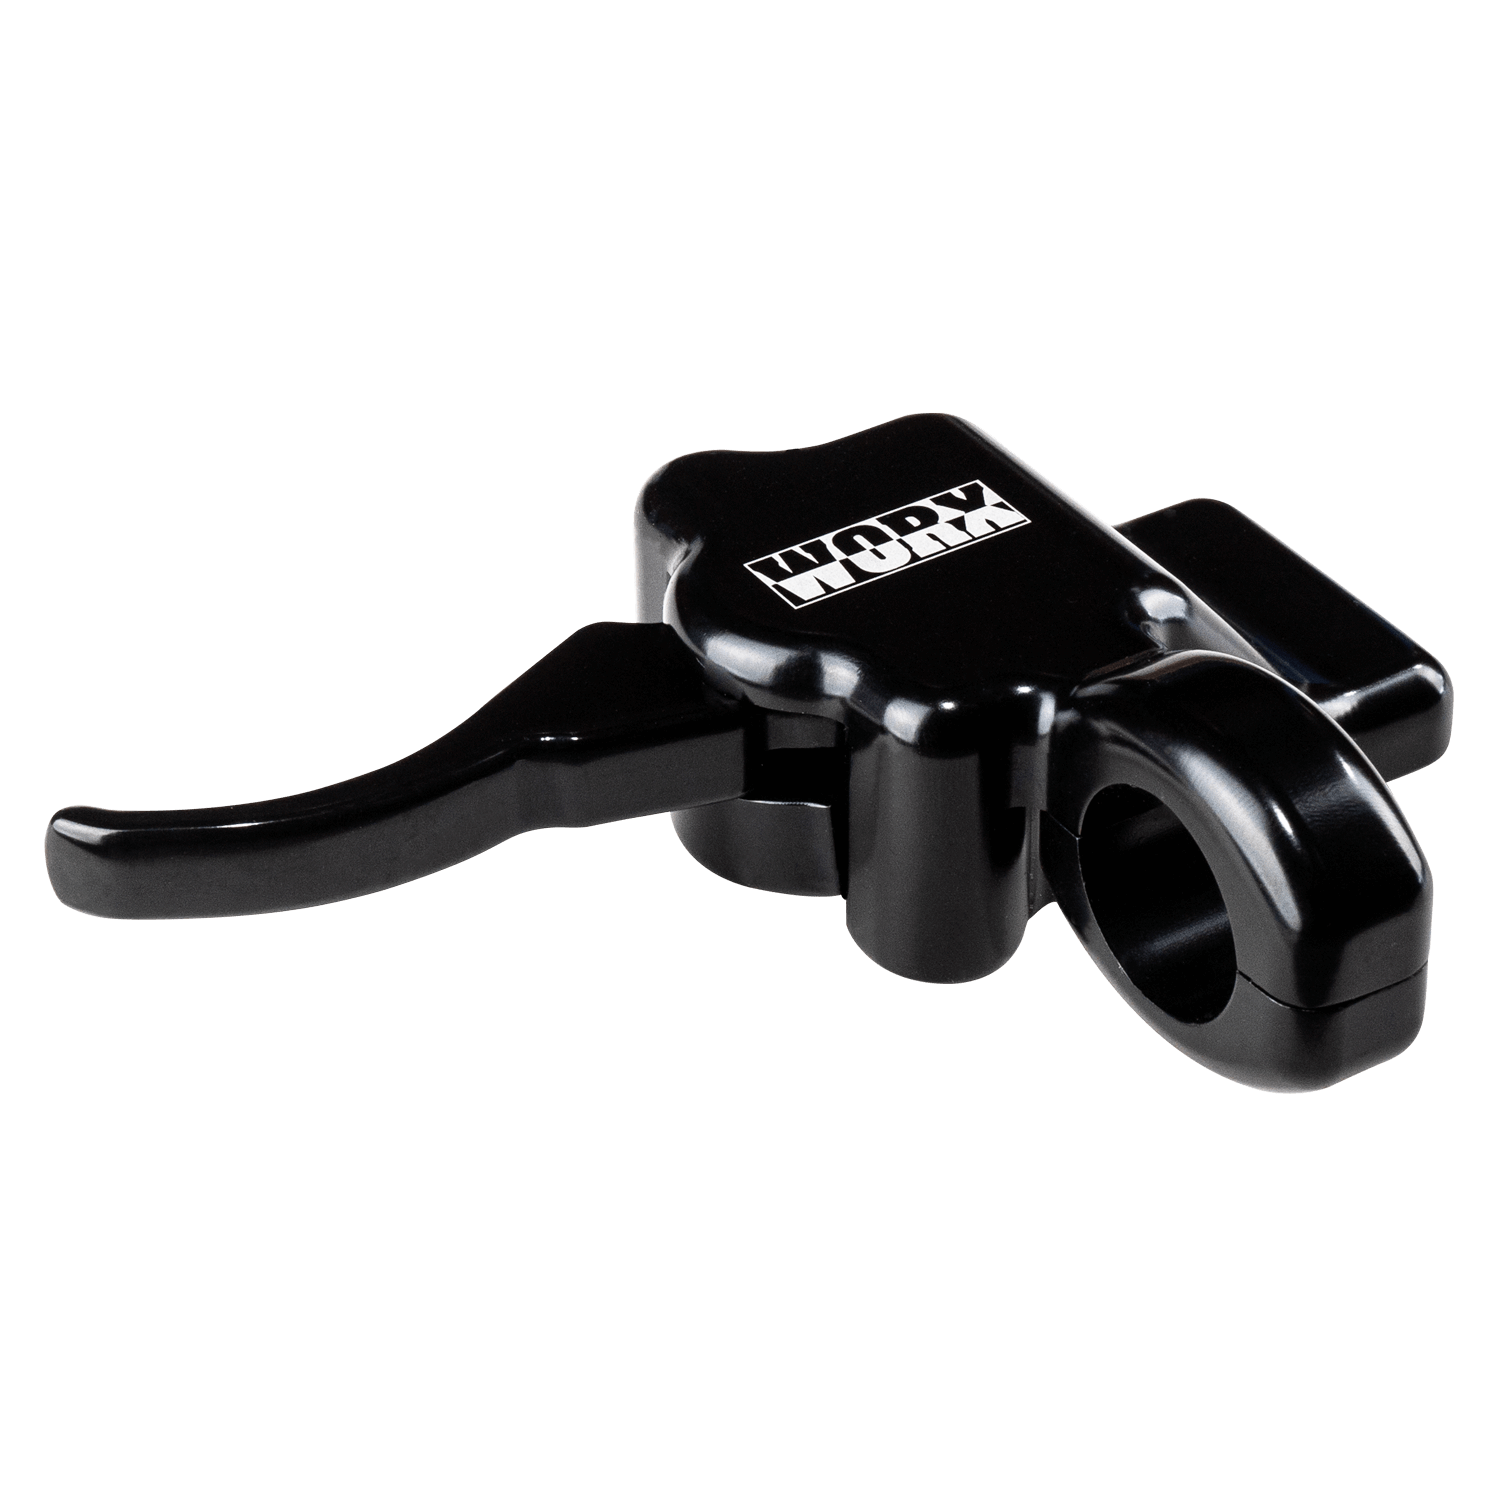 Seadoo Electronic IBR Lever Assembly